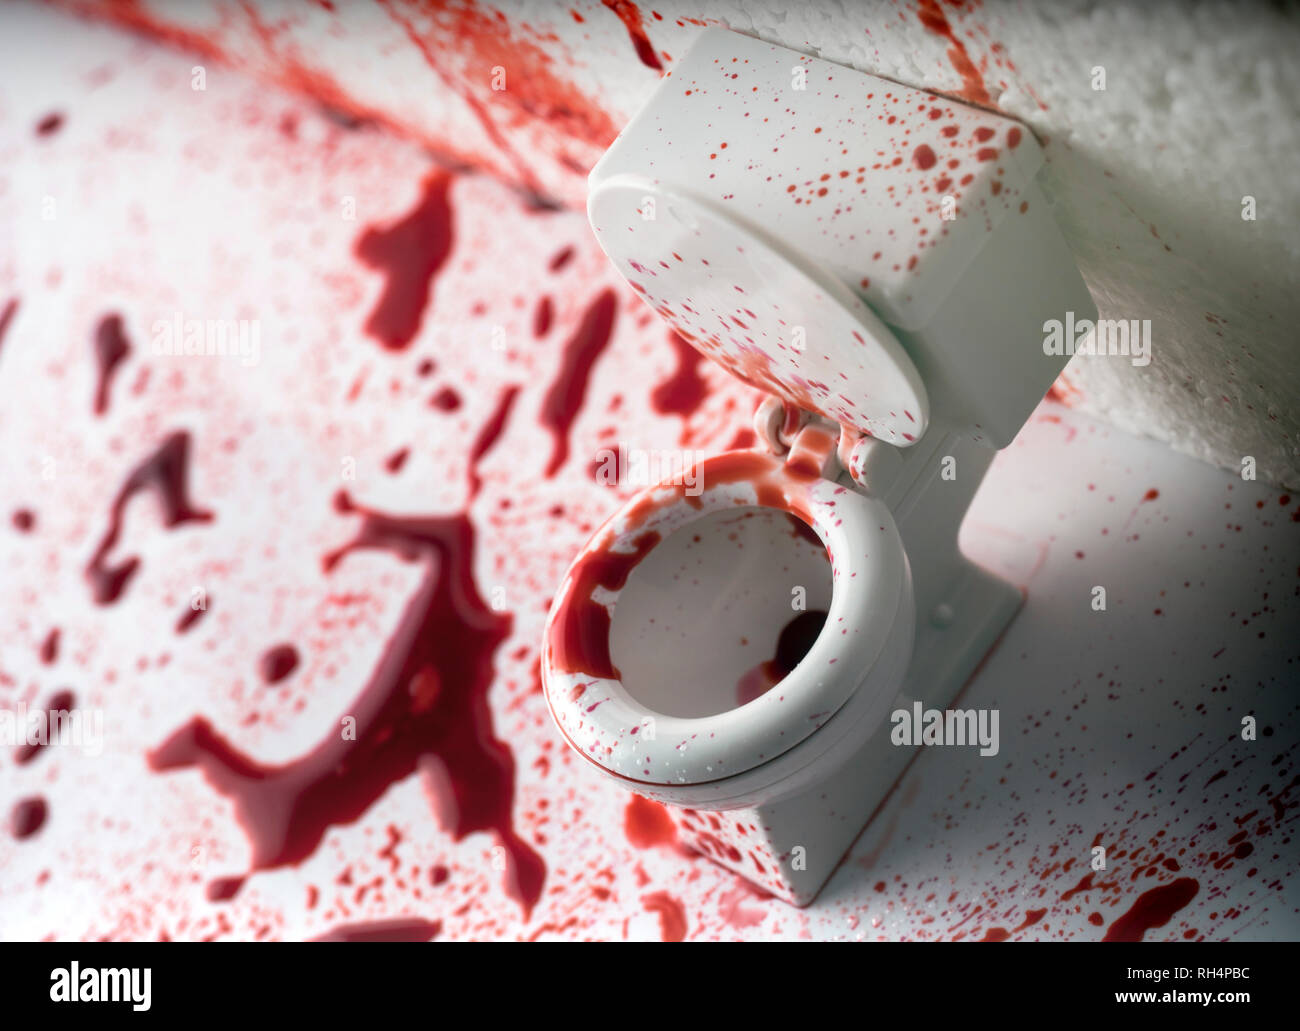 Bathroom covered in blood, conceptual image, composition horizontal Stock Photo